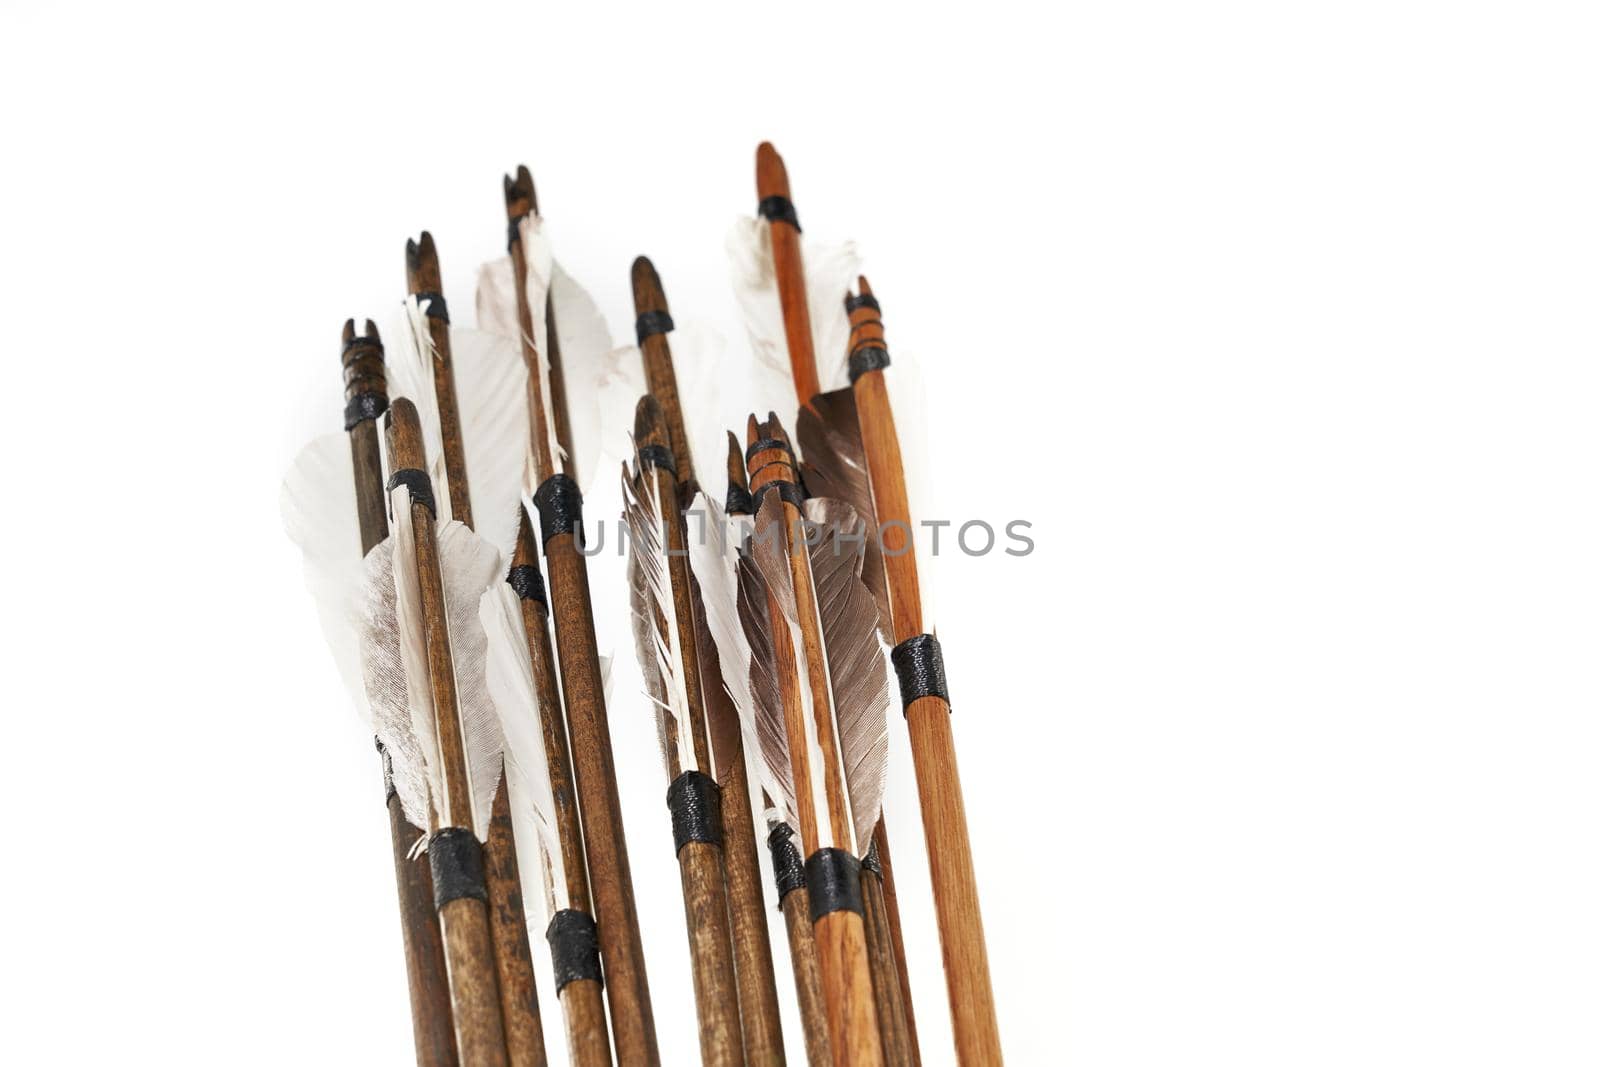 Closeup view of ancient wooden arrows with grey feathers isolated on white background. Qualitative old medieval weapon.